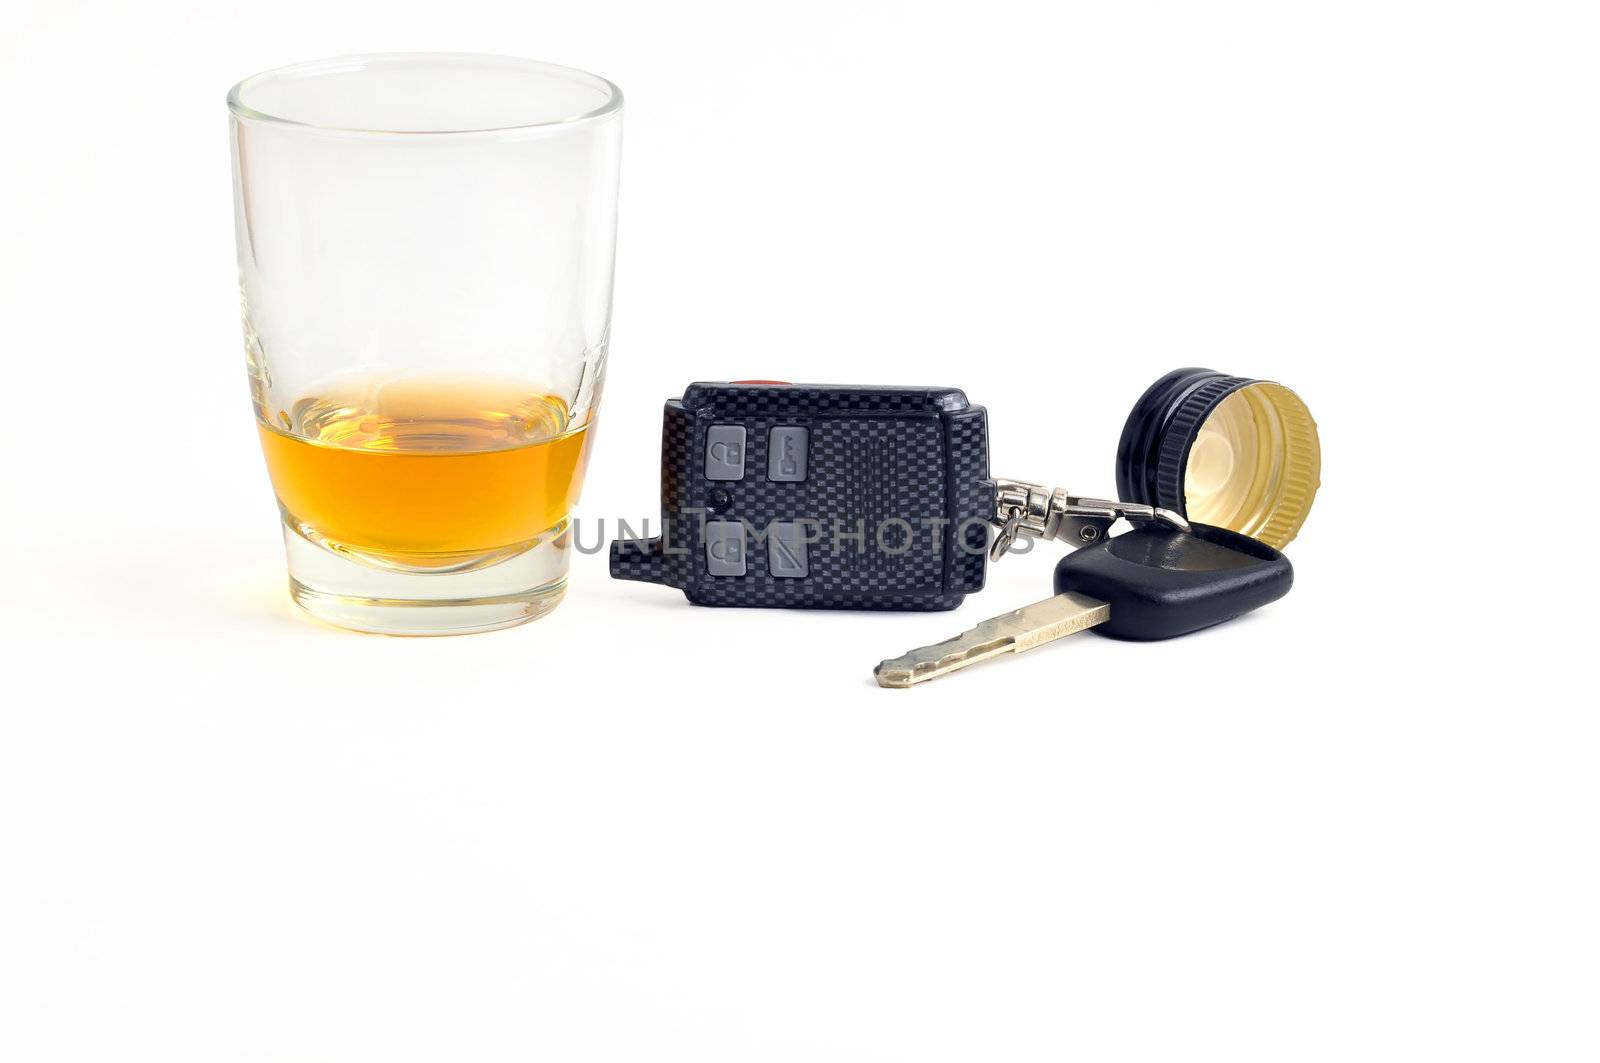 Drink and drive conceopt by Mirage3